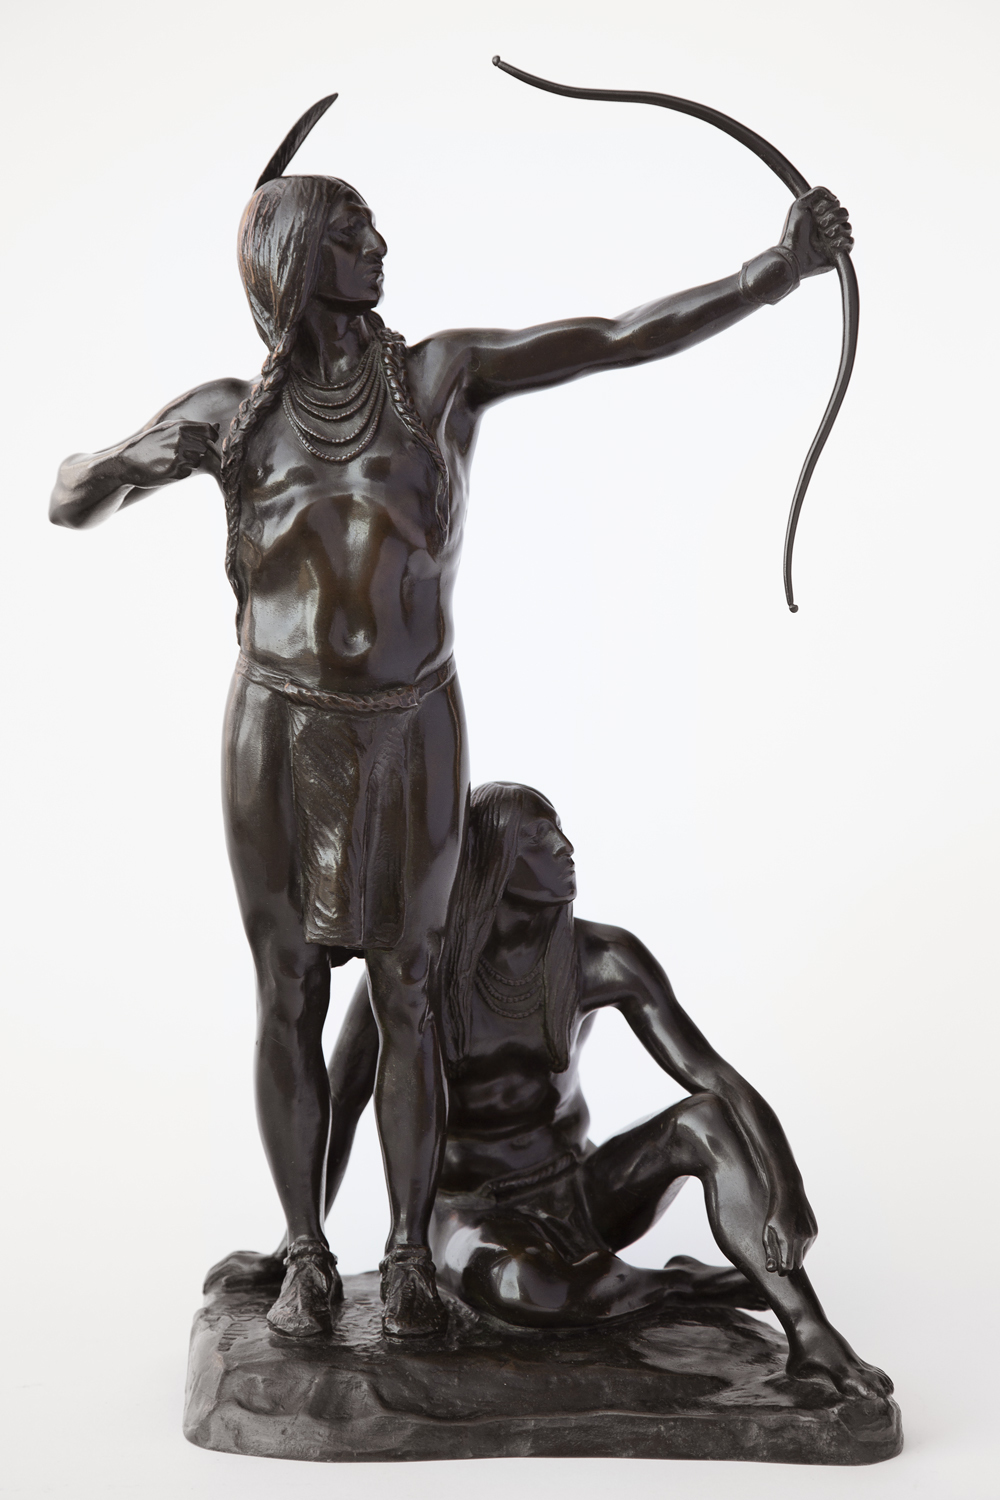 

											</b>

											<em>
												Lure of the West: Celebrating 50 Years of Gerald Peters Gallery  </em> 

											<h4>
												New York: April 29 - May 27, 2022											</h4>

		                																																<i>Cyrus Edwin Dallin, The Archery Lesson,</i>  
																																								modeled 1907, 
																																								bronze, 
																																								18 x 12 inches 
																								
		                				